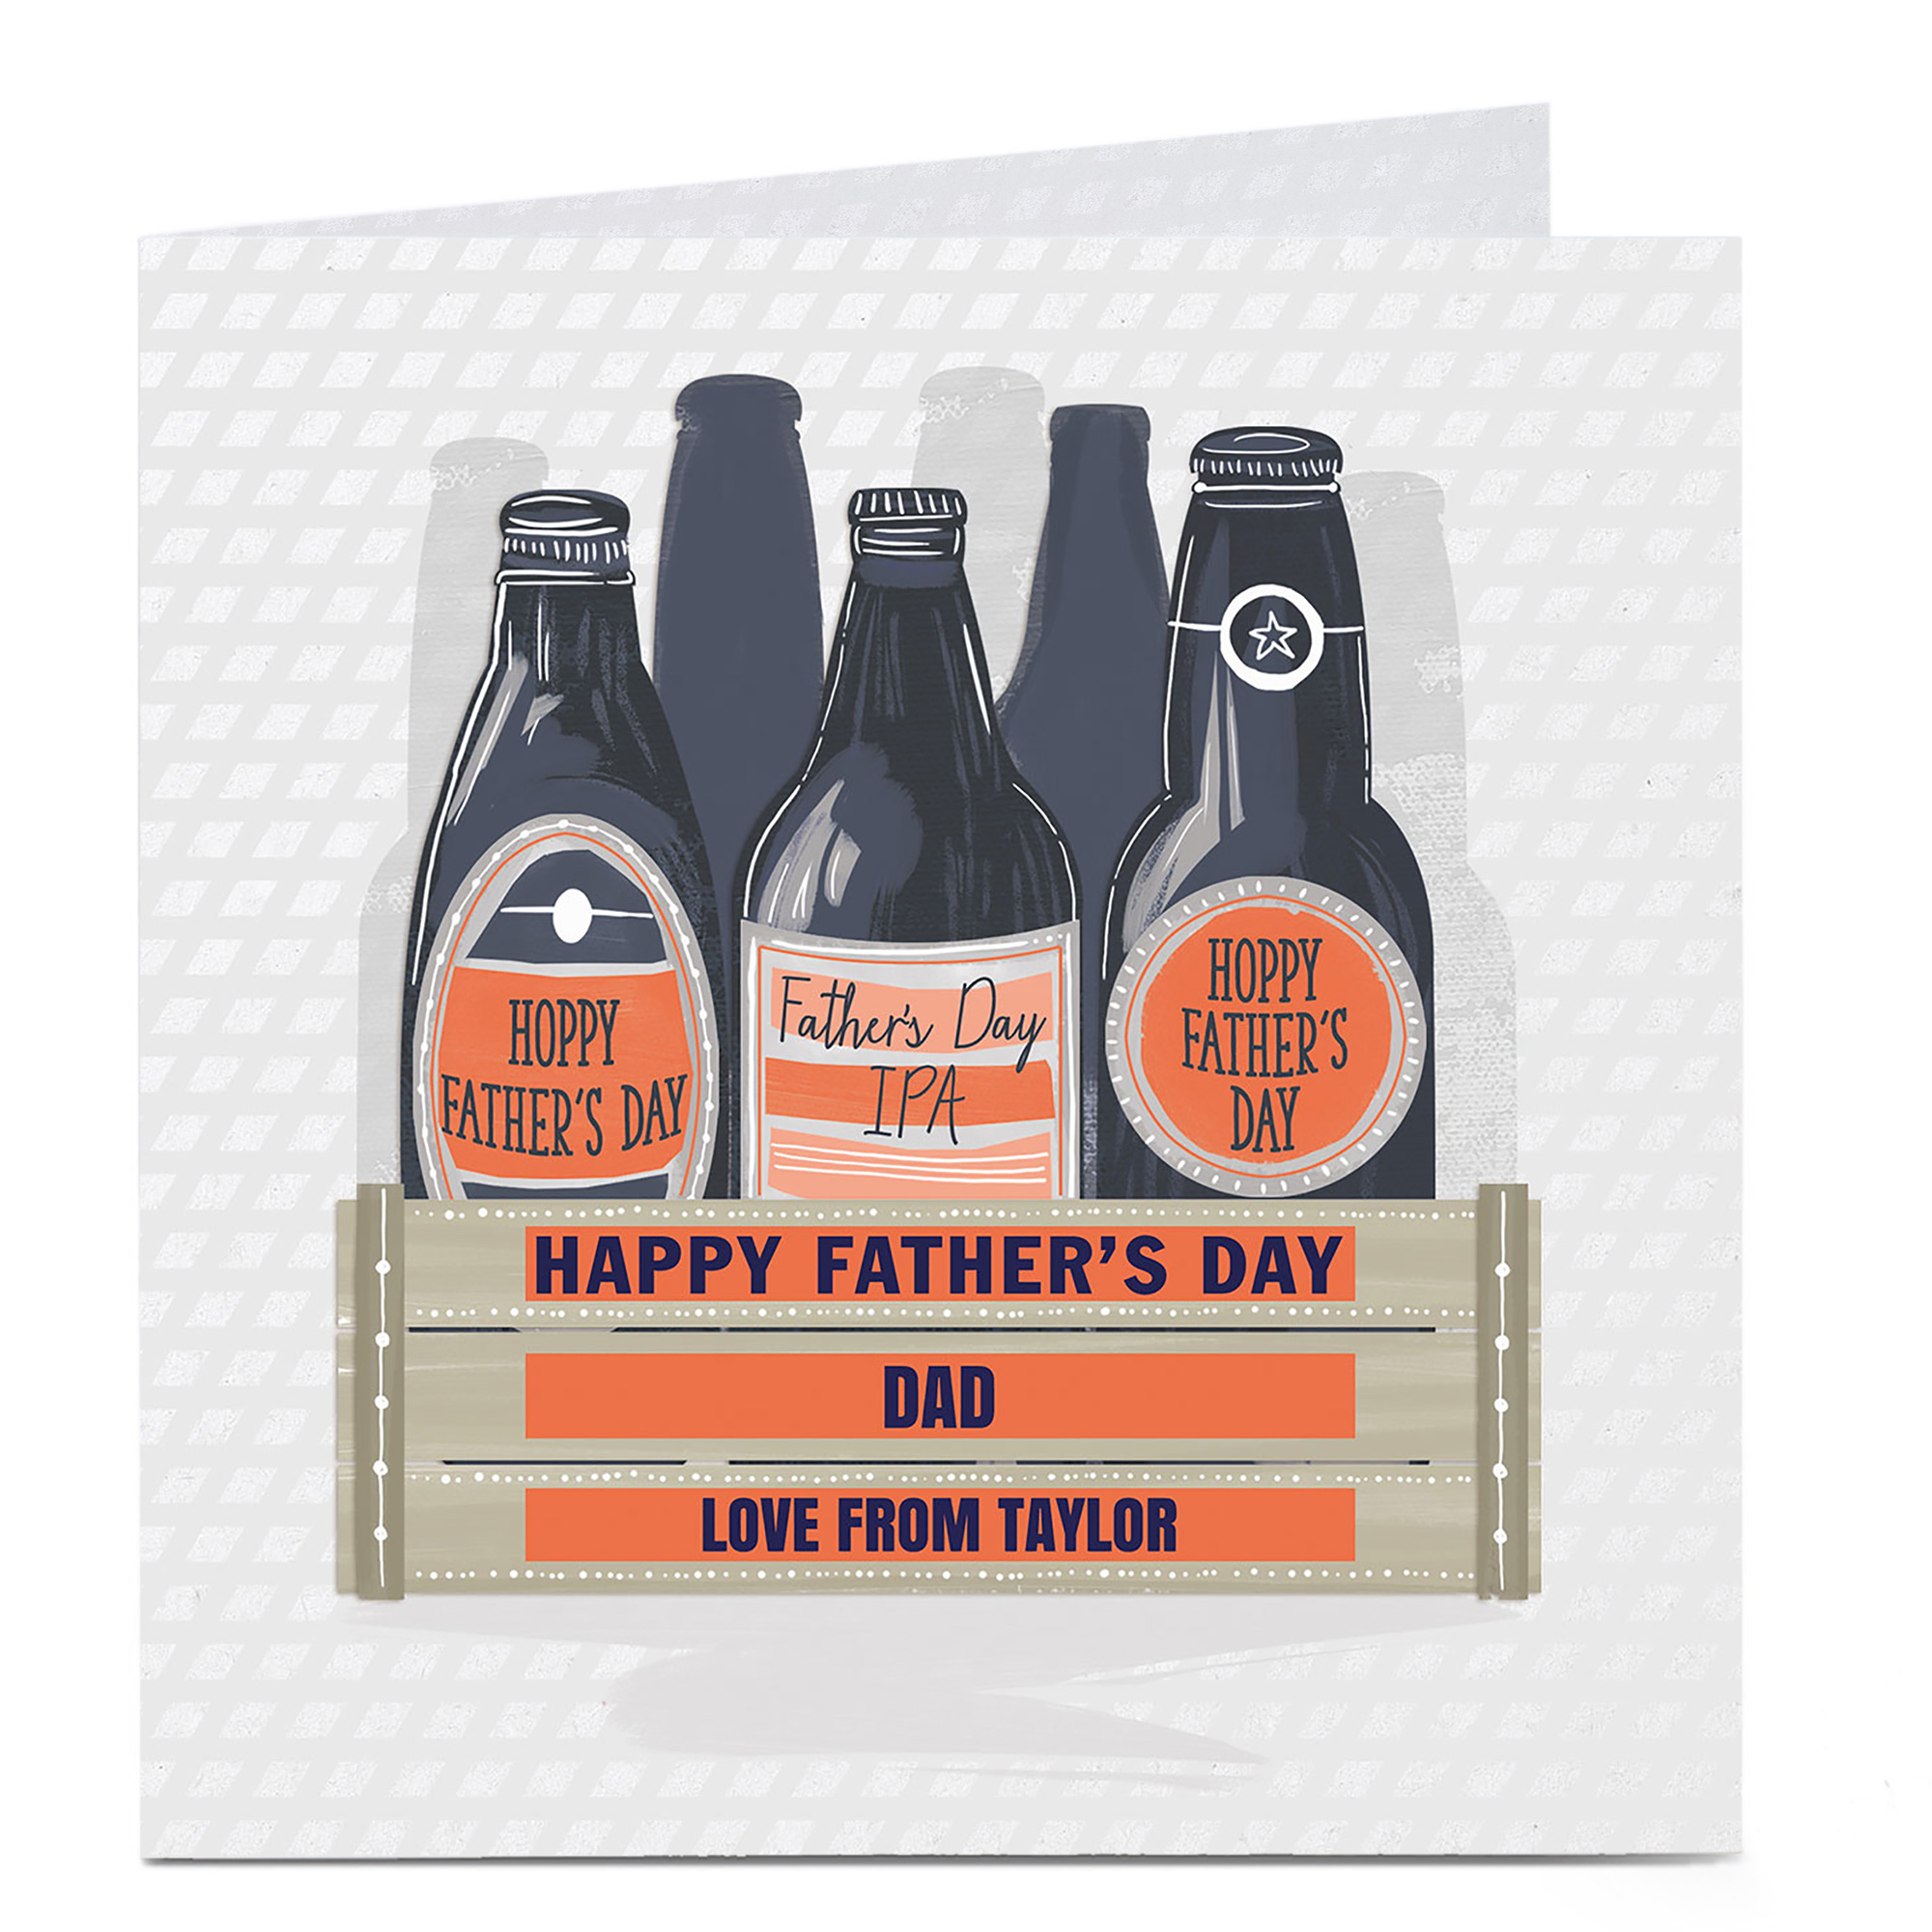 Personalised Father's Day Card - Beer Bottle Crate